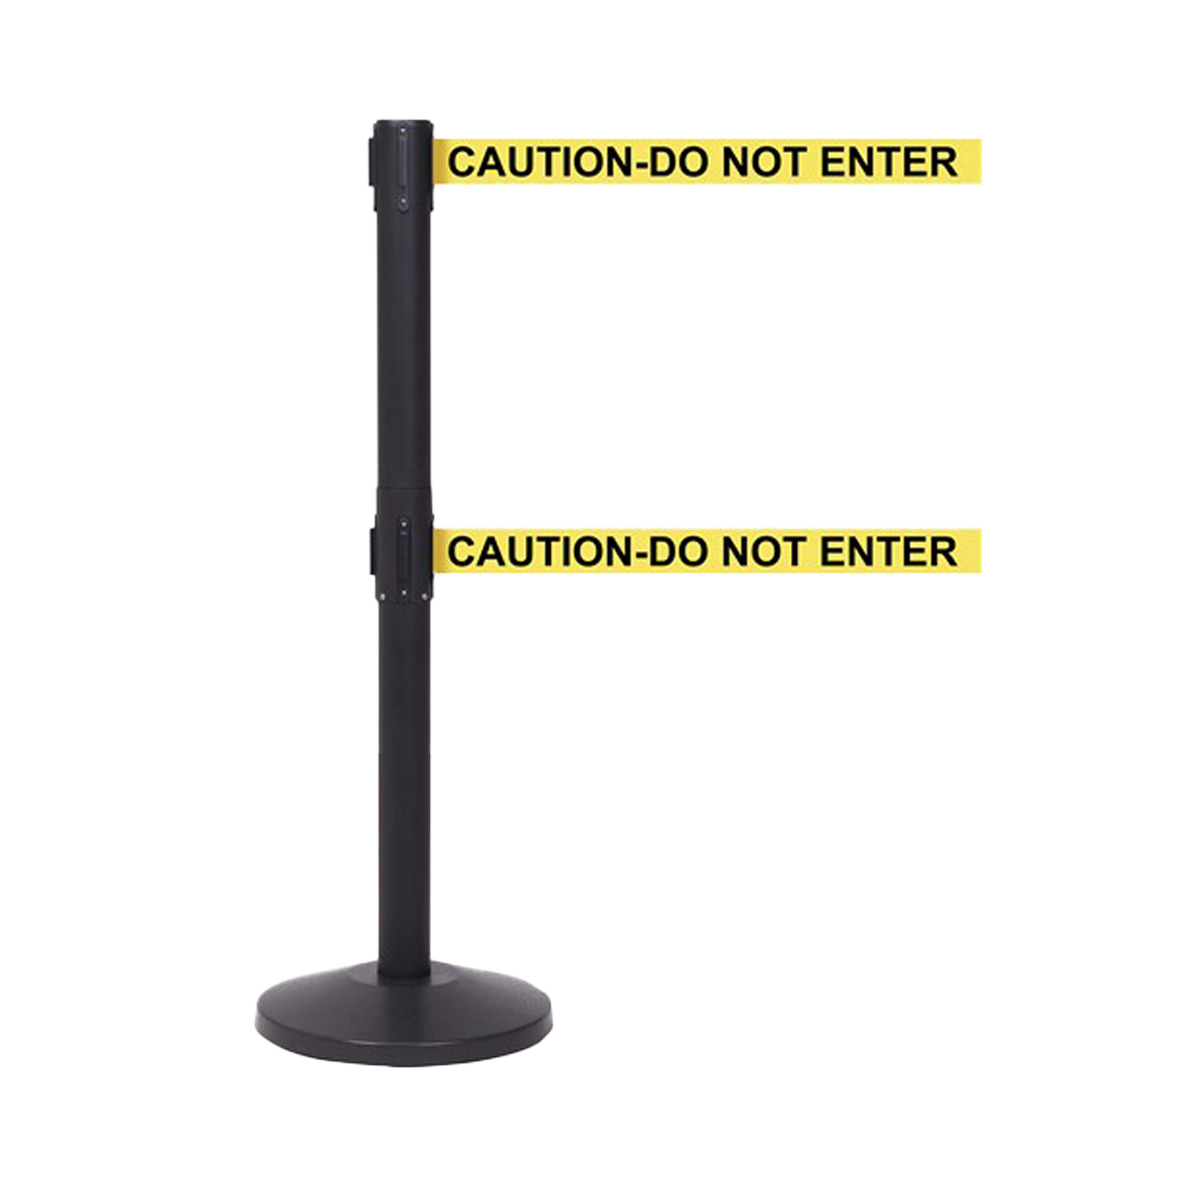 QueueMaster Twin Retractable Belt Barriers Also Include Eight Pre-printed Warning Message Belt Options